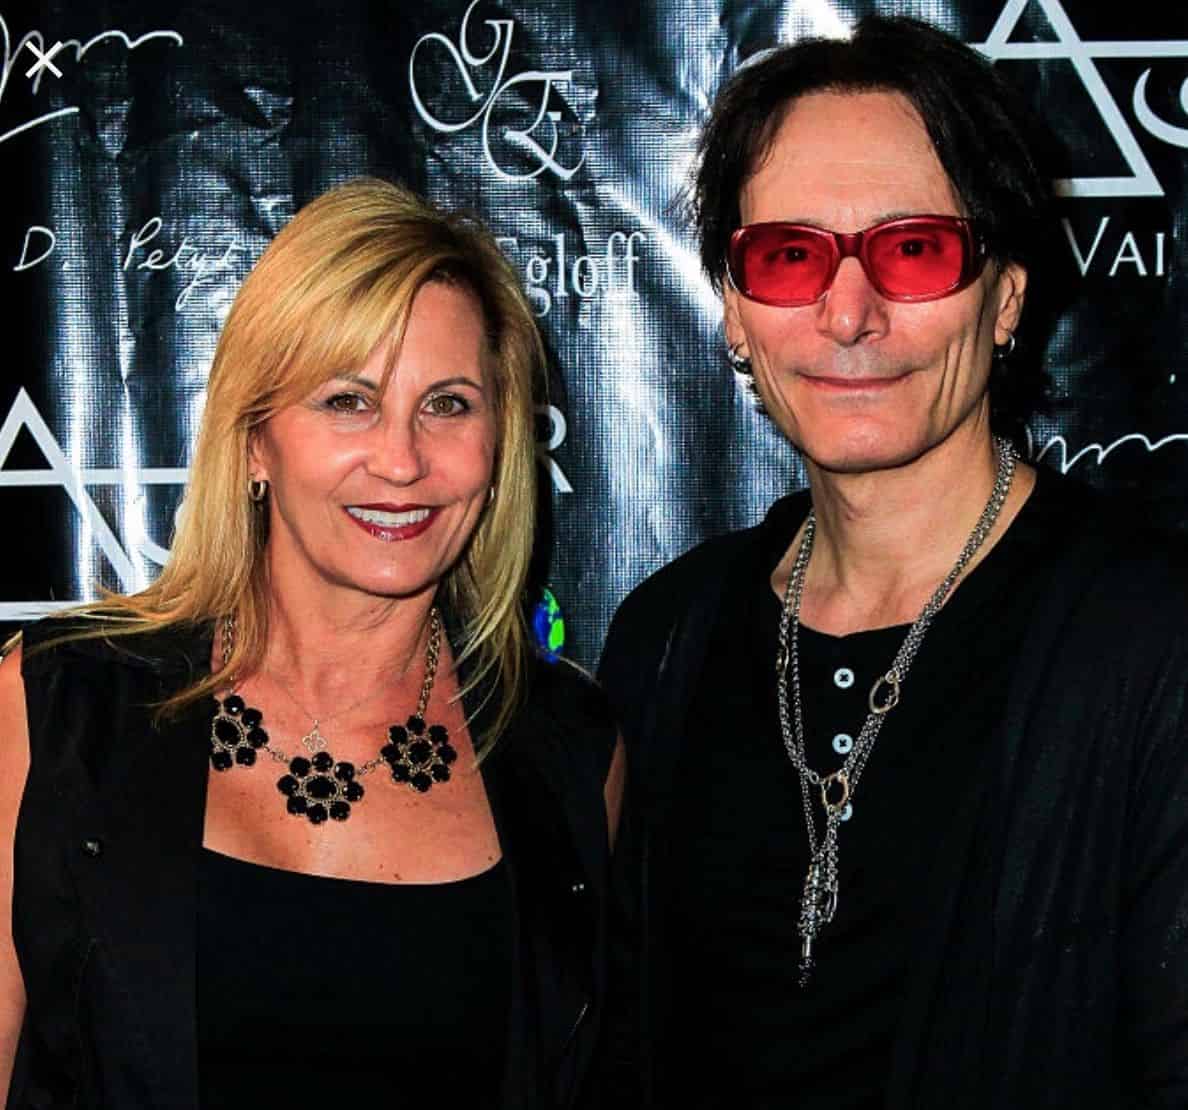 Image of Steve Vai with his wife, Pia Maiocco